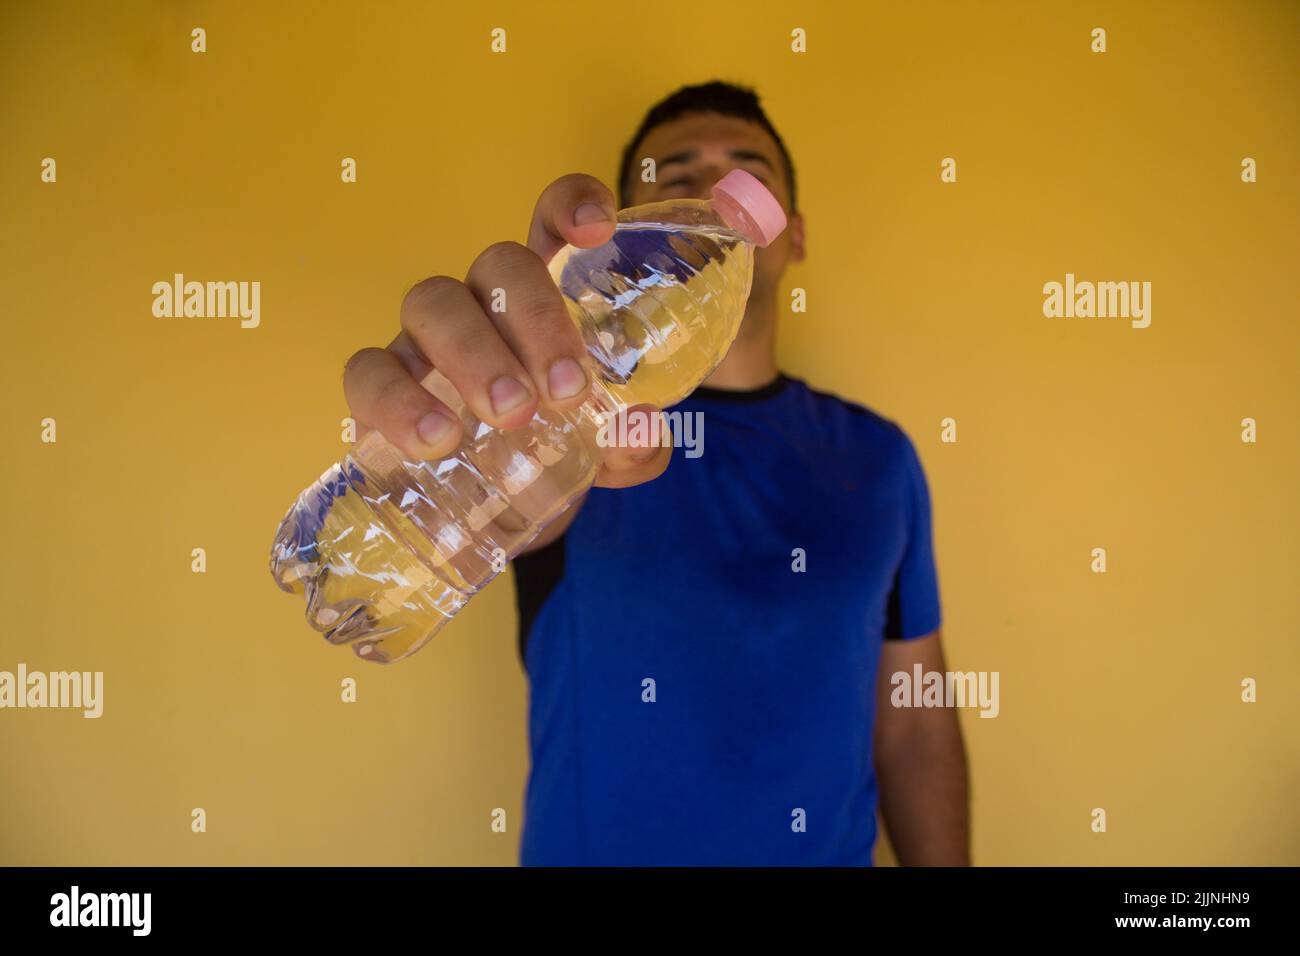 Image of a man holding a bottle of water after playing sports. Importance of hydration in the summer. Stock Photo